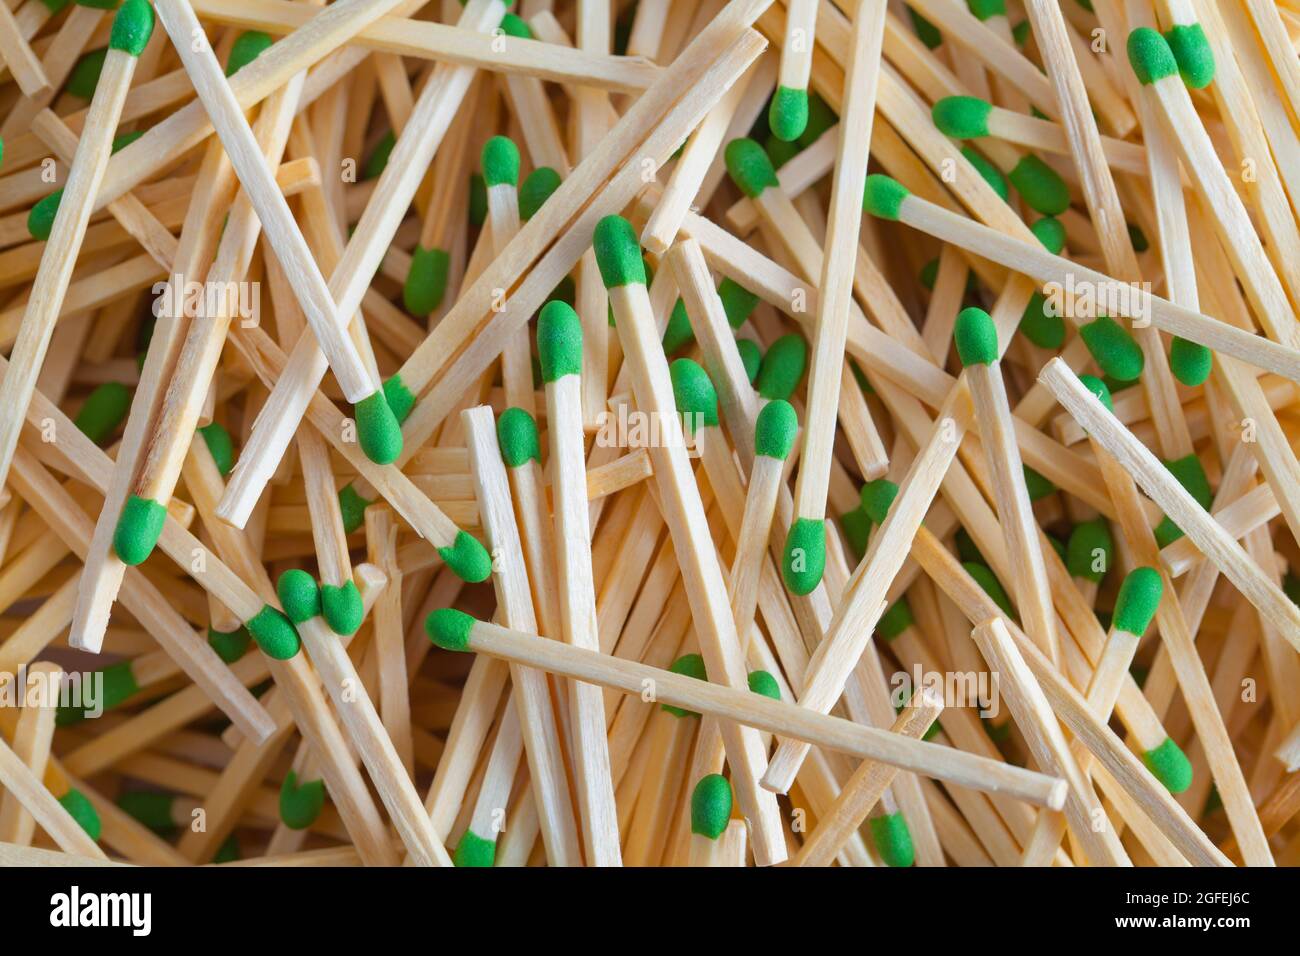 Large Pile of Green Matches Background Texture. Stock Photo